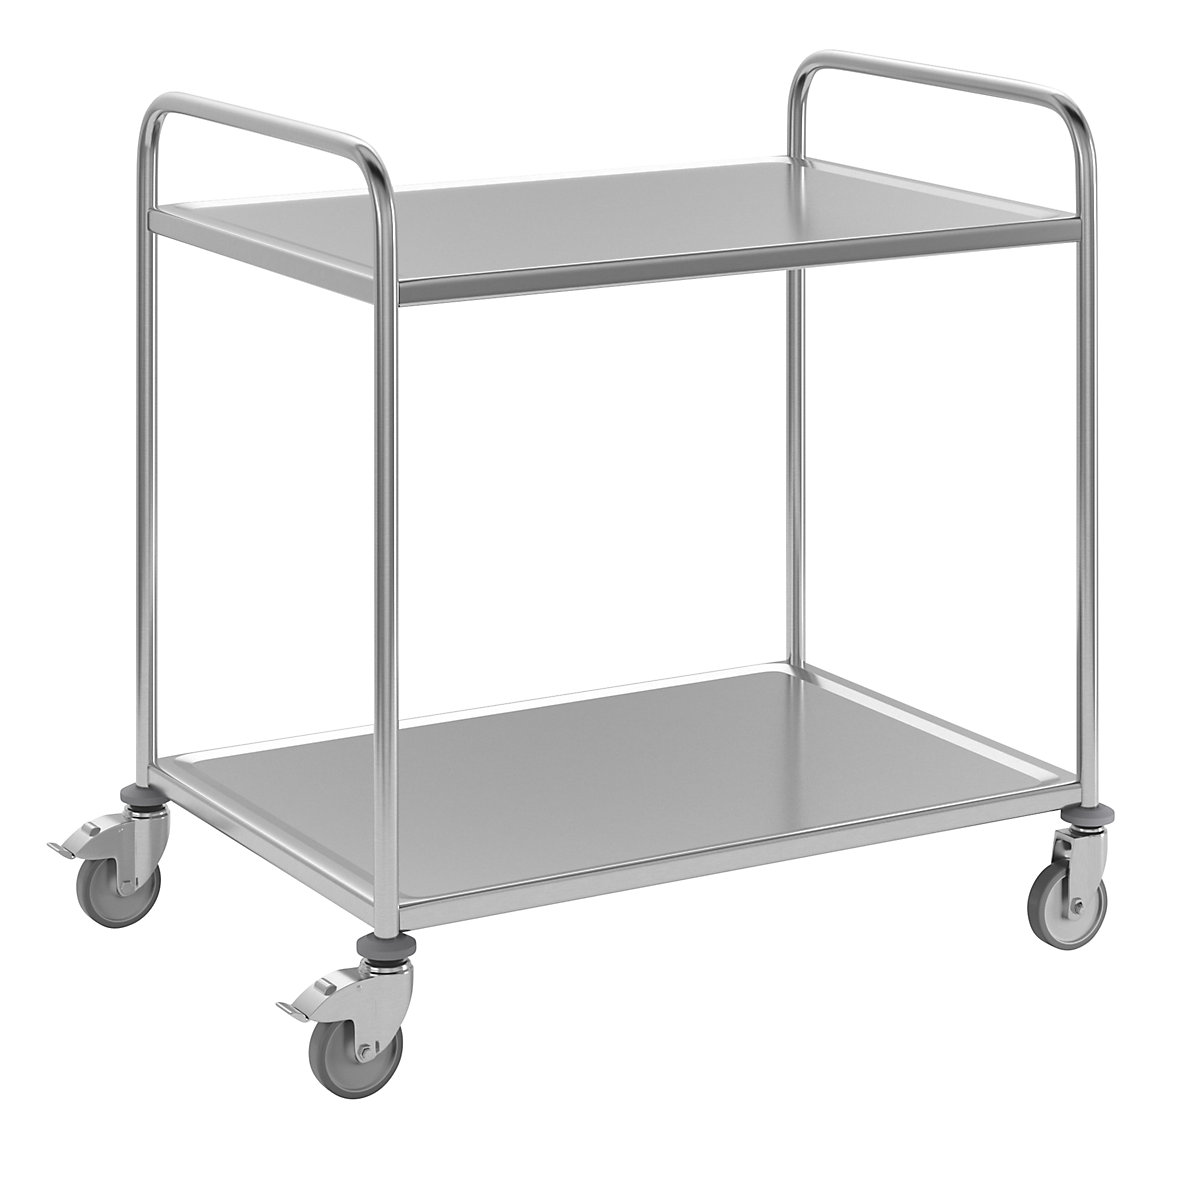 Stainless steel serving trolley, 2 shelves, zinc plated castor, rubber tyres, LxWxH 1070 x 670 x 970 mm-2